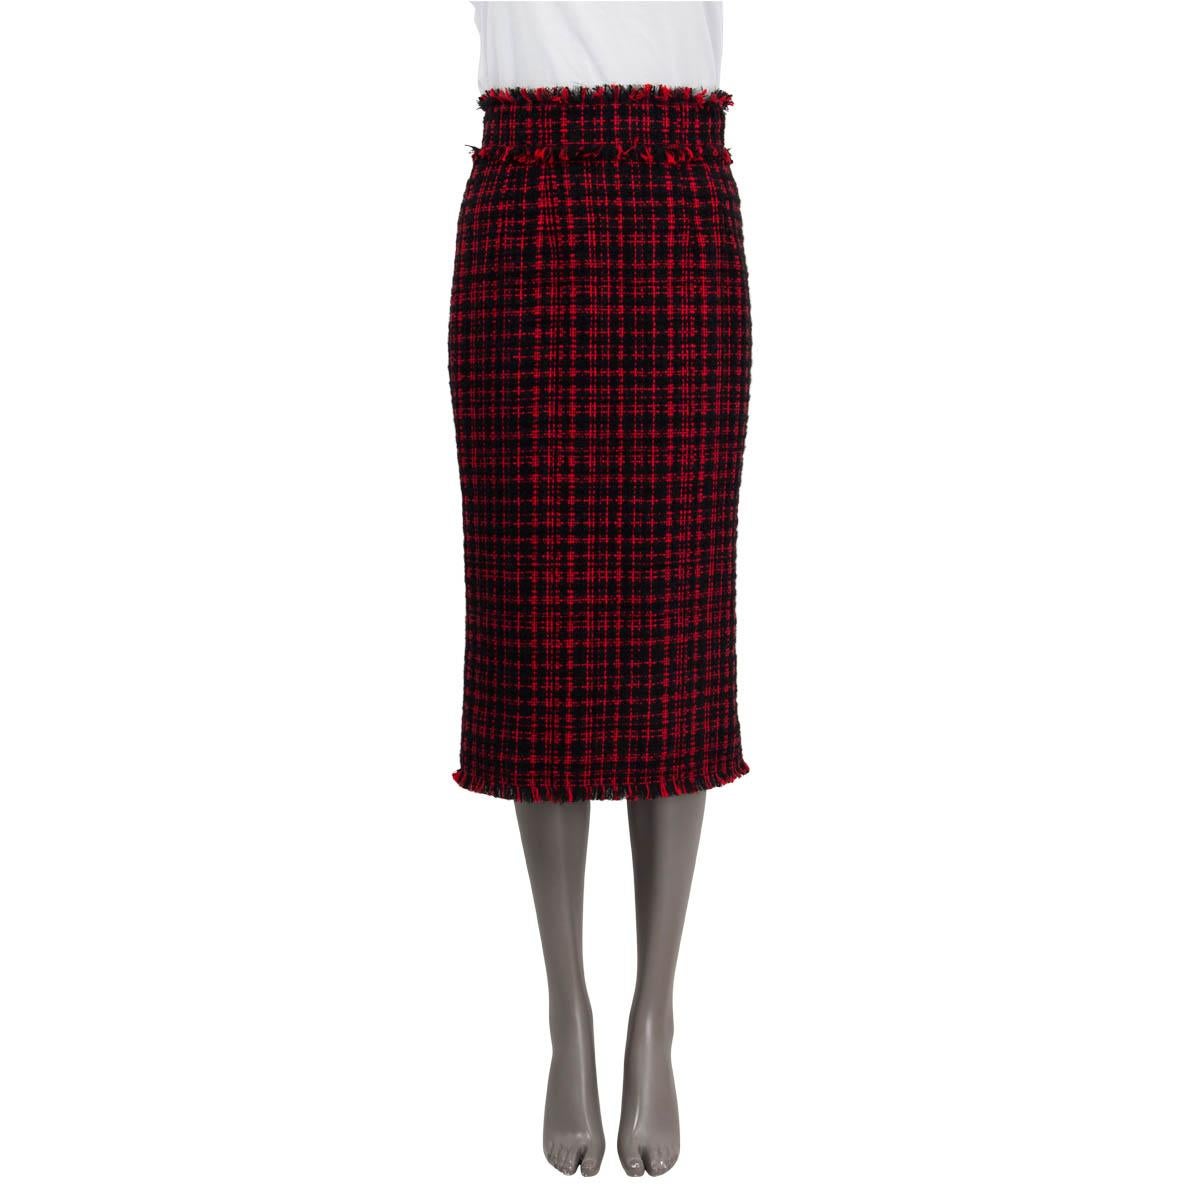 100% authentic Dolce & Gabbana below-knee skirt in red and black cotton (41%), acrylic (21%), polyester (12%), mohair (7%), nylon (6%) and wool (6%). Features a fringed hem and a check print. Opens with two push buttons, one button and a zipper on